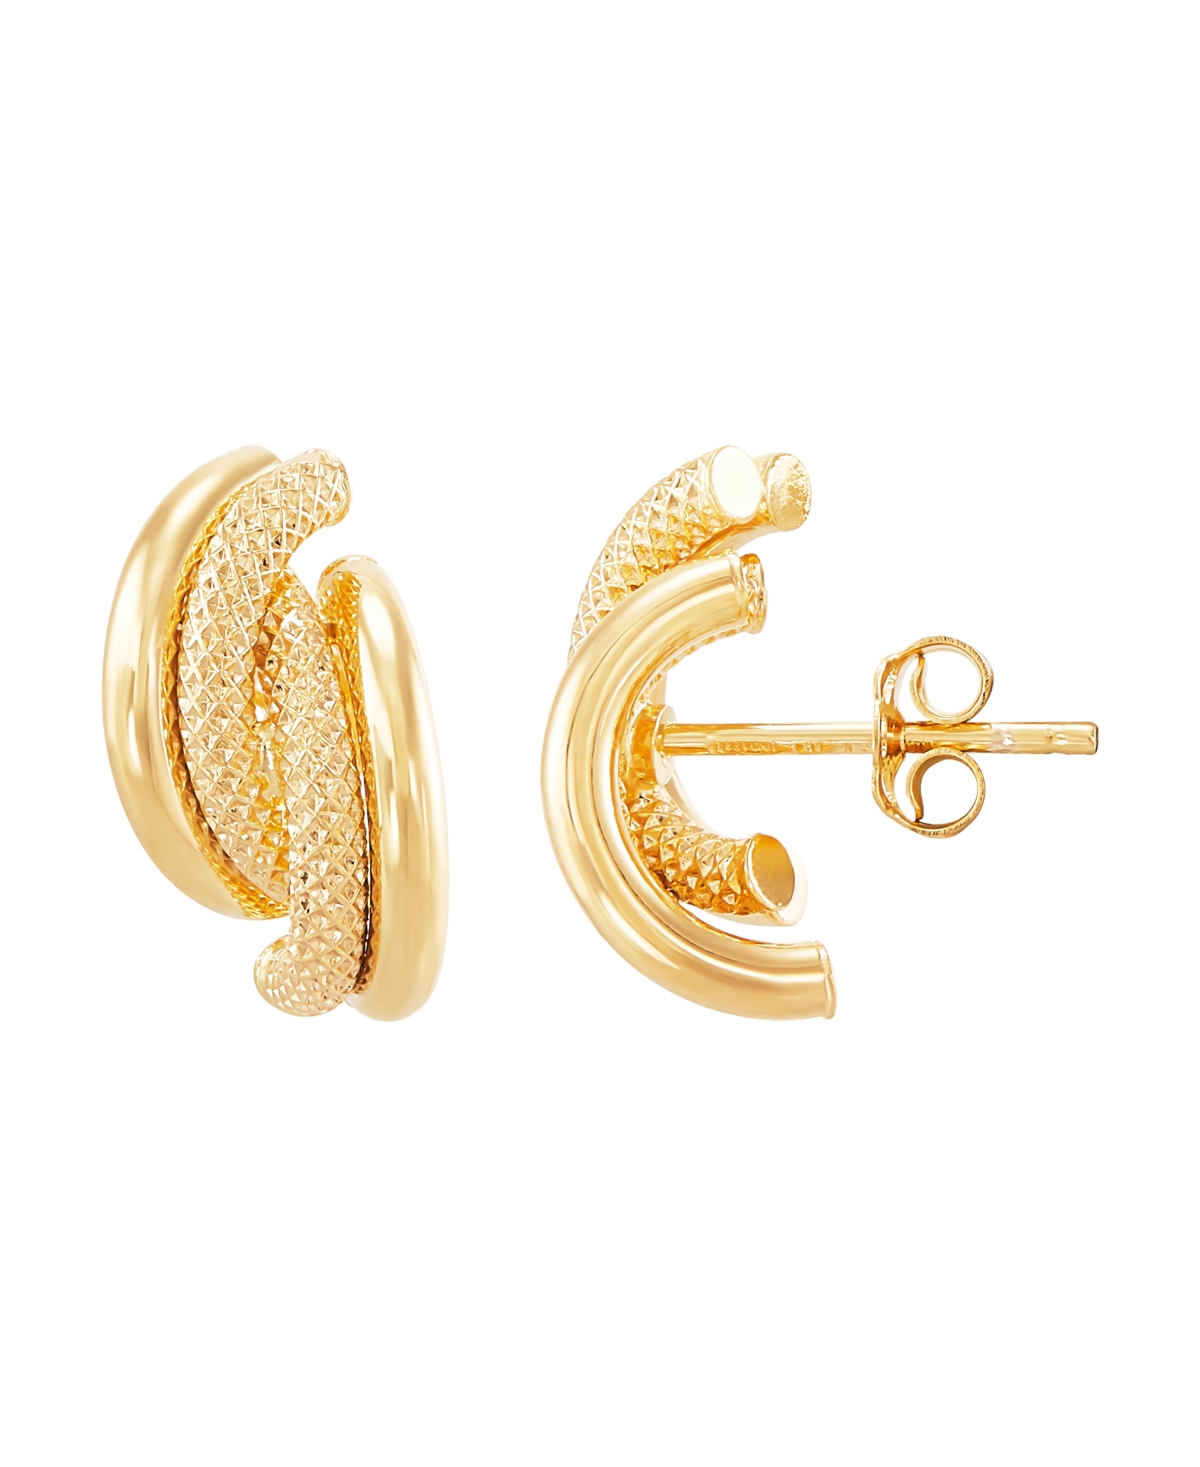 Polished Hollow 4 Row Curve J Hoop Stud Earrings in 10K Yellow Gold - Yellow Gold